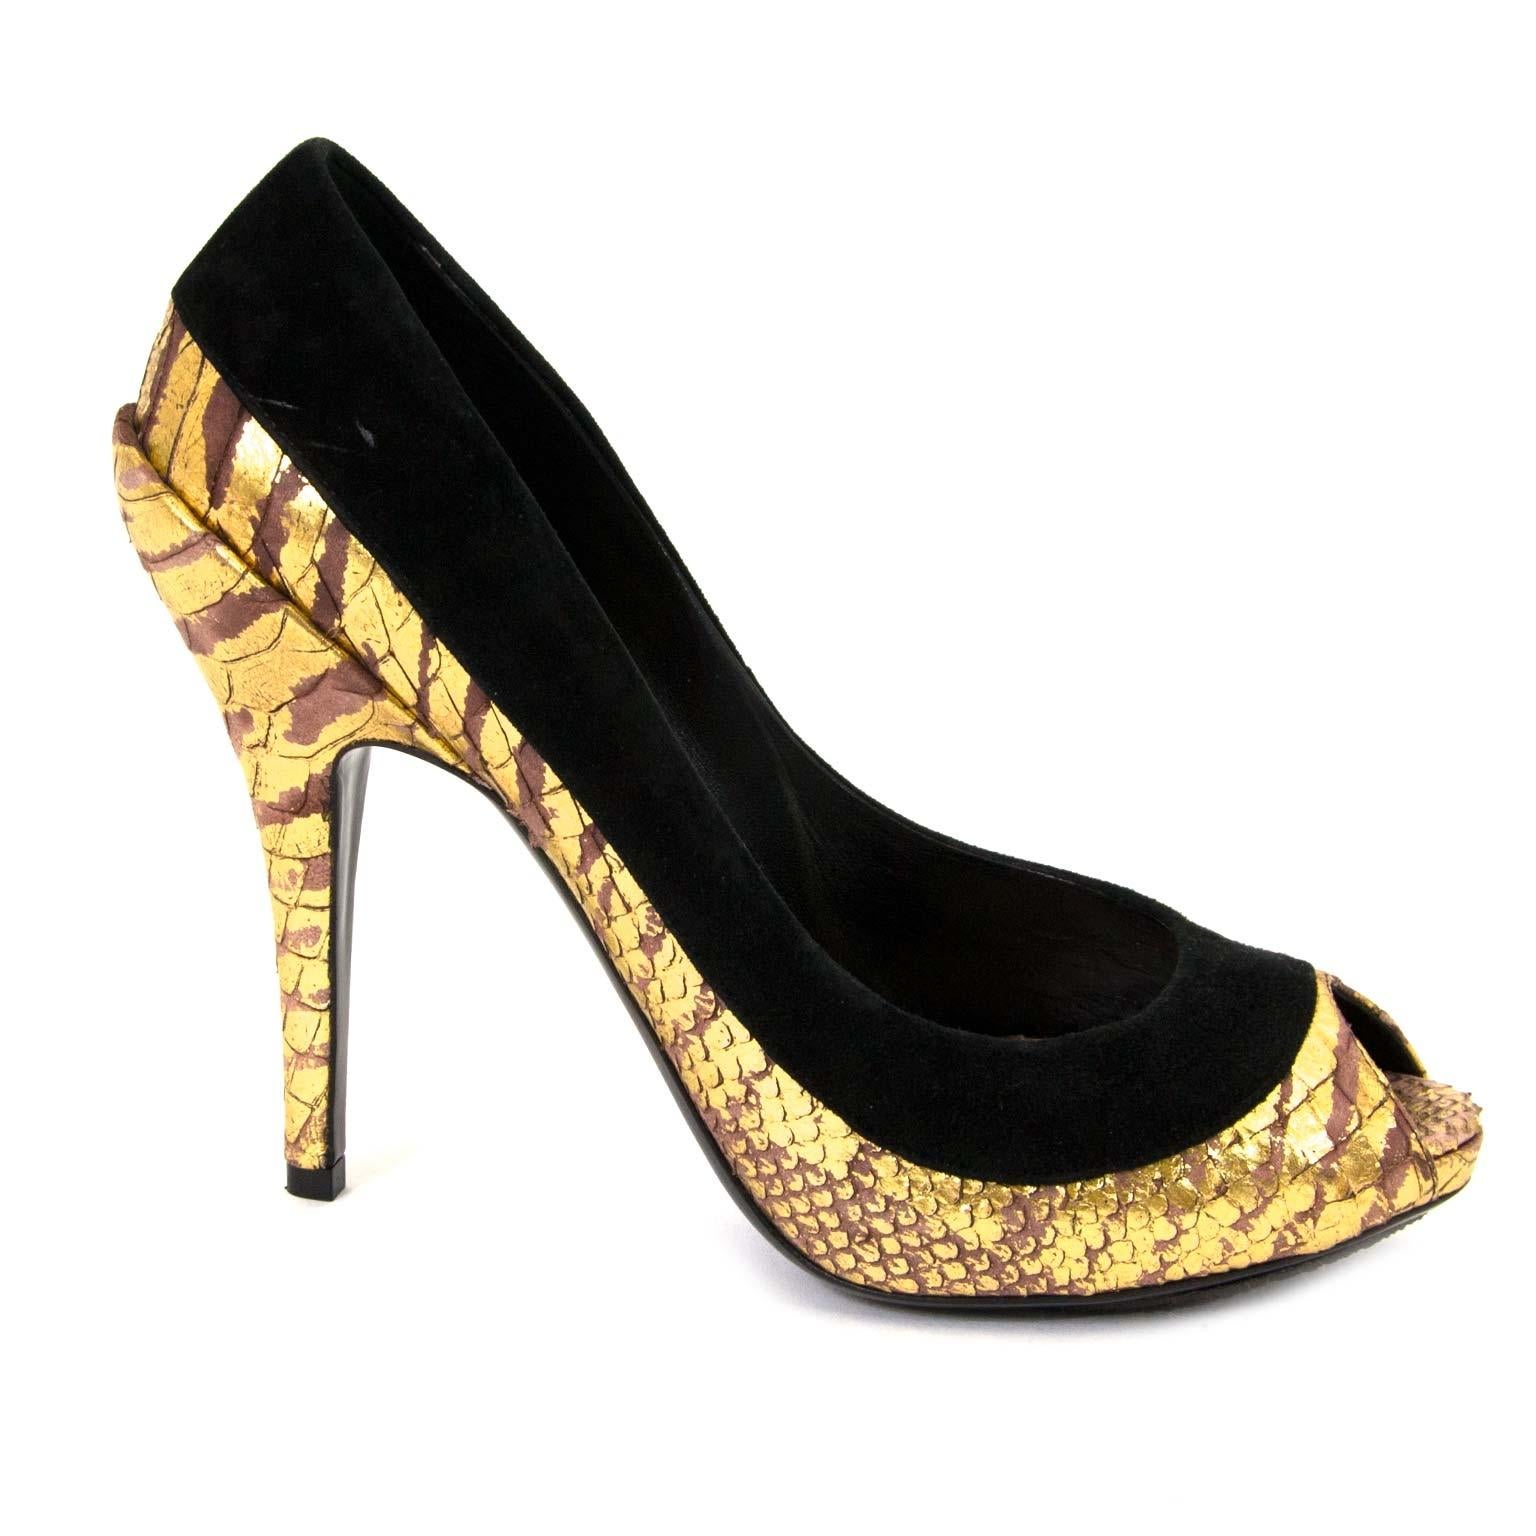 Christian Dior Black And Gold Peep Toe Pumps - Size 38 1